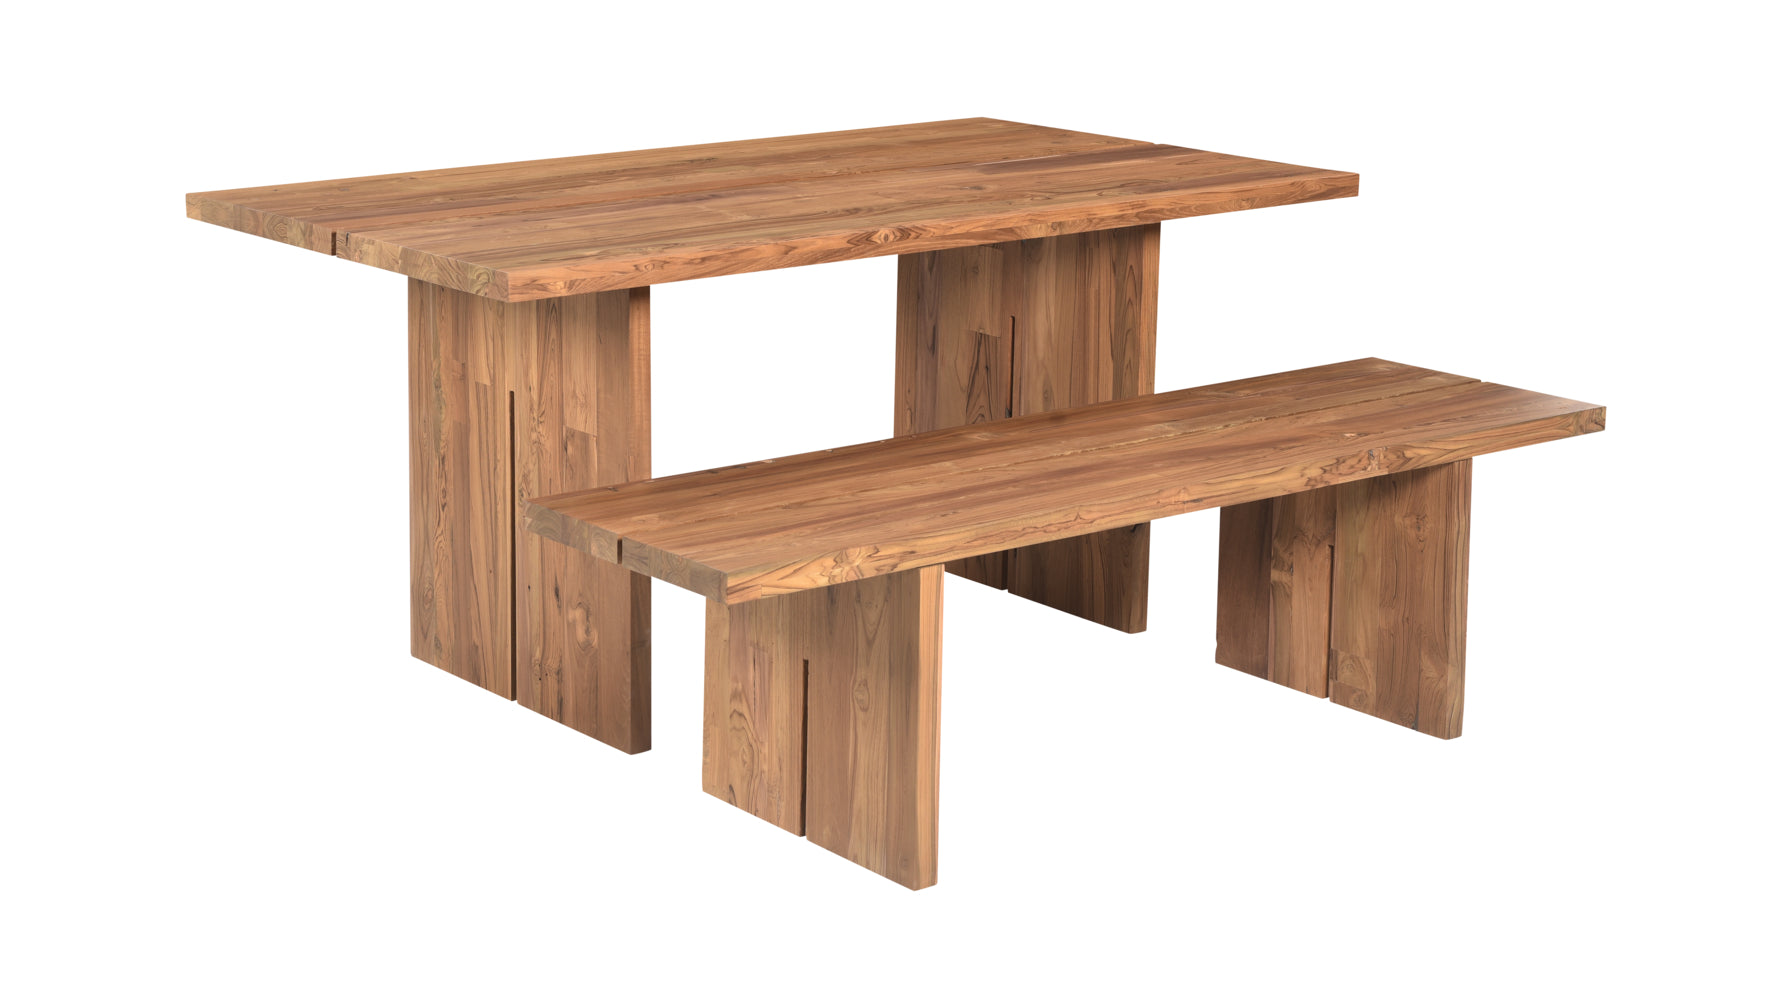 Plane Outdoor Dining Table, Seats 6-8, Teak - Image 5